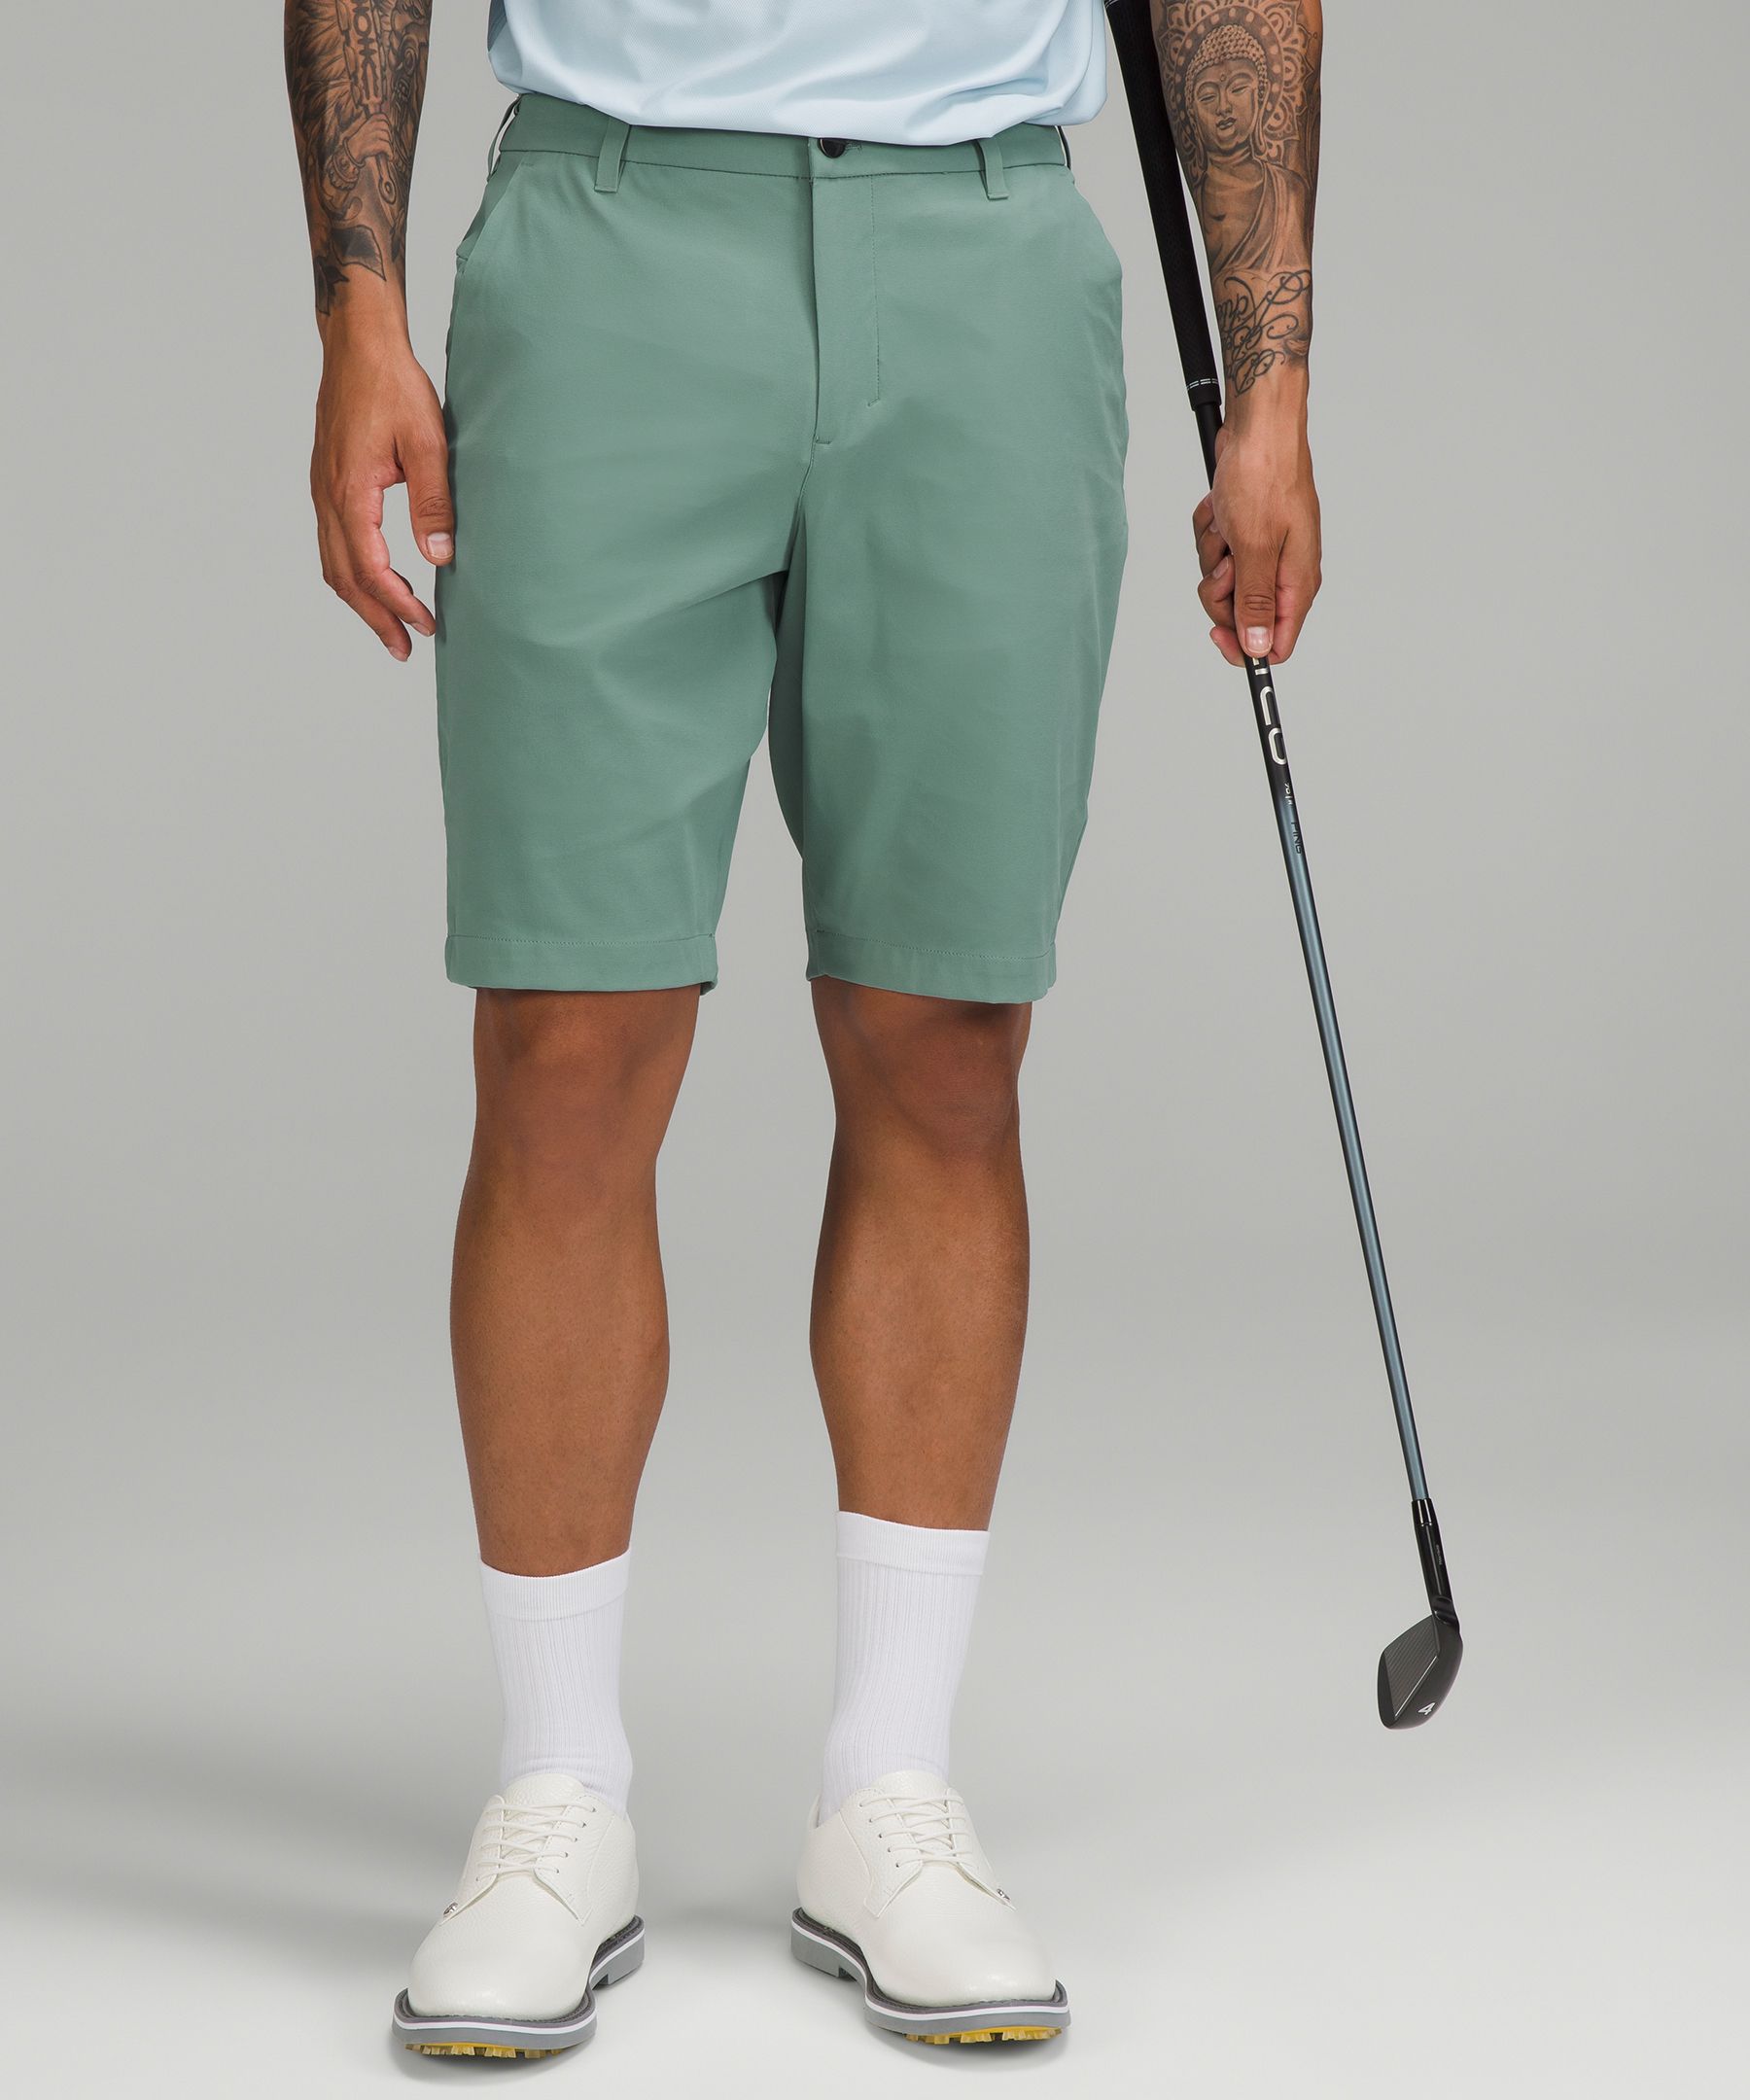 Why these Lululemon shorts are (still) our favorites for golf, Golf  Equipment: Clubs, Balls, Bags